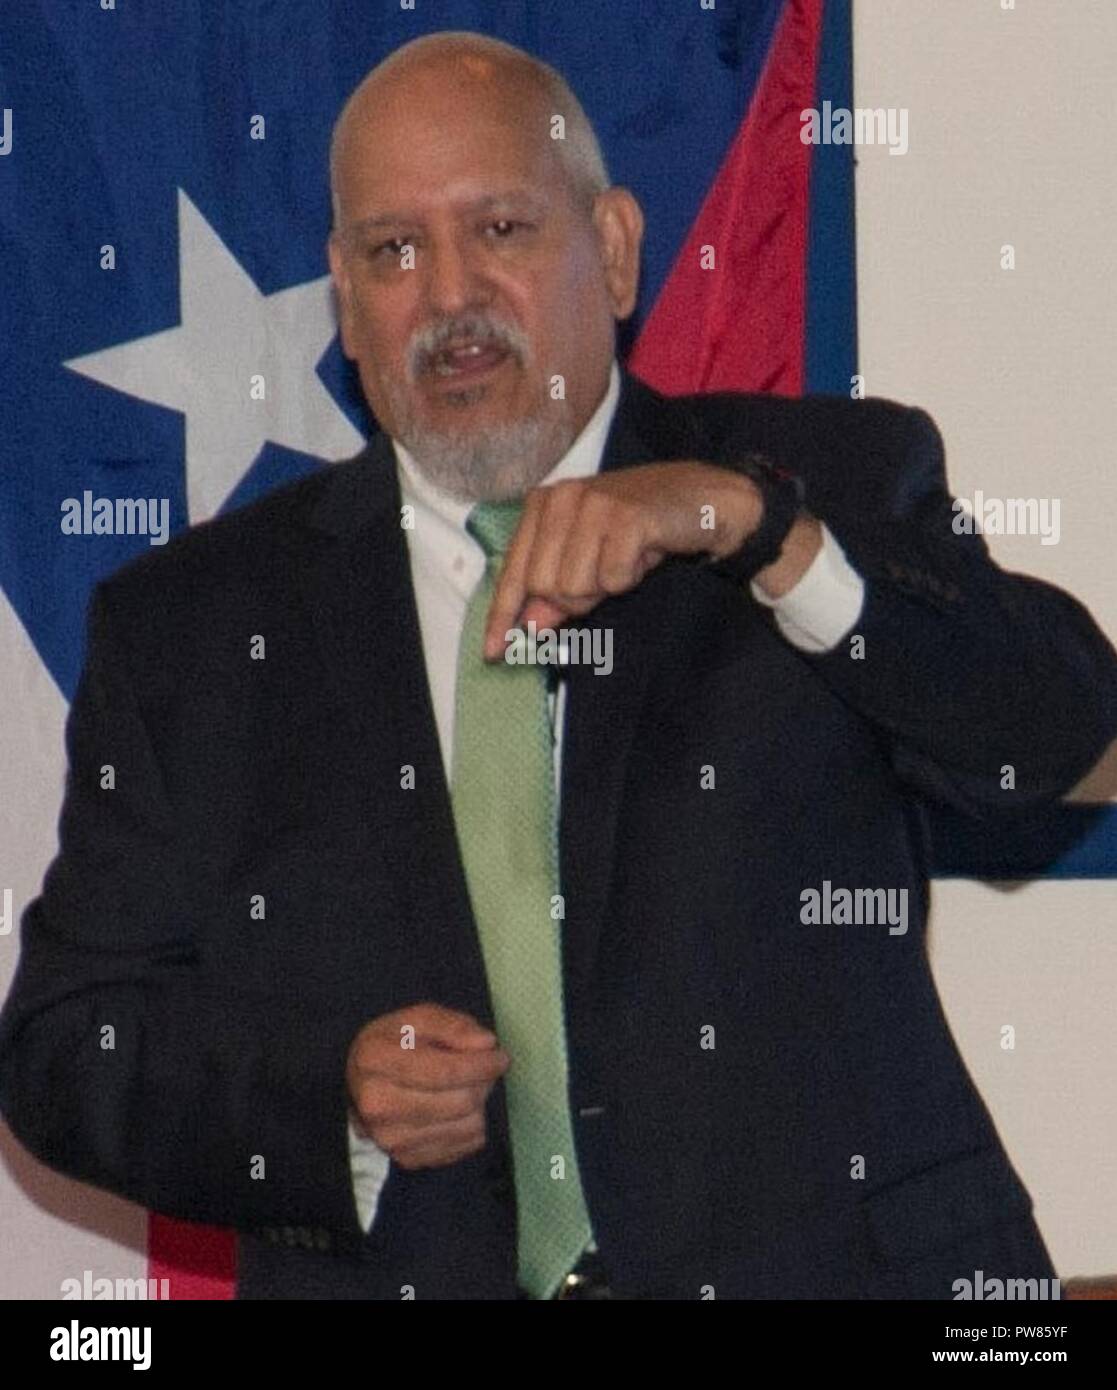 DAHLGREN, Va. (Sept. 28, 2017) - Hispanic Heritage Observance keynote speaker Lance Carrington encourages his audience to pray for the residents of Puerto Rico after Hurricane Maria devastated the island, and to pray for those living in Texas, the Gulf Coast, and Florida who are recovering from Hurricanes Harvey and Irma. Carrington – retired from the Senior Executive Service (SES) as a special agent for NASA and the U.S. Postal Service – recounted his life and career which included service in the Army as a reserve chief warrant officer. He retired from the Army reserves on Oct. 1, 2017 after  Stock Photo